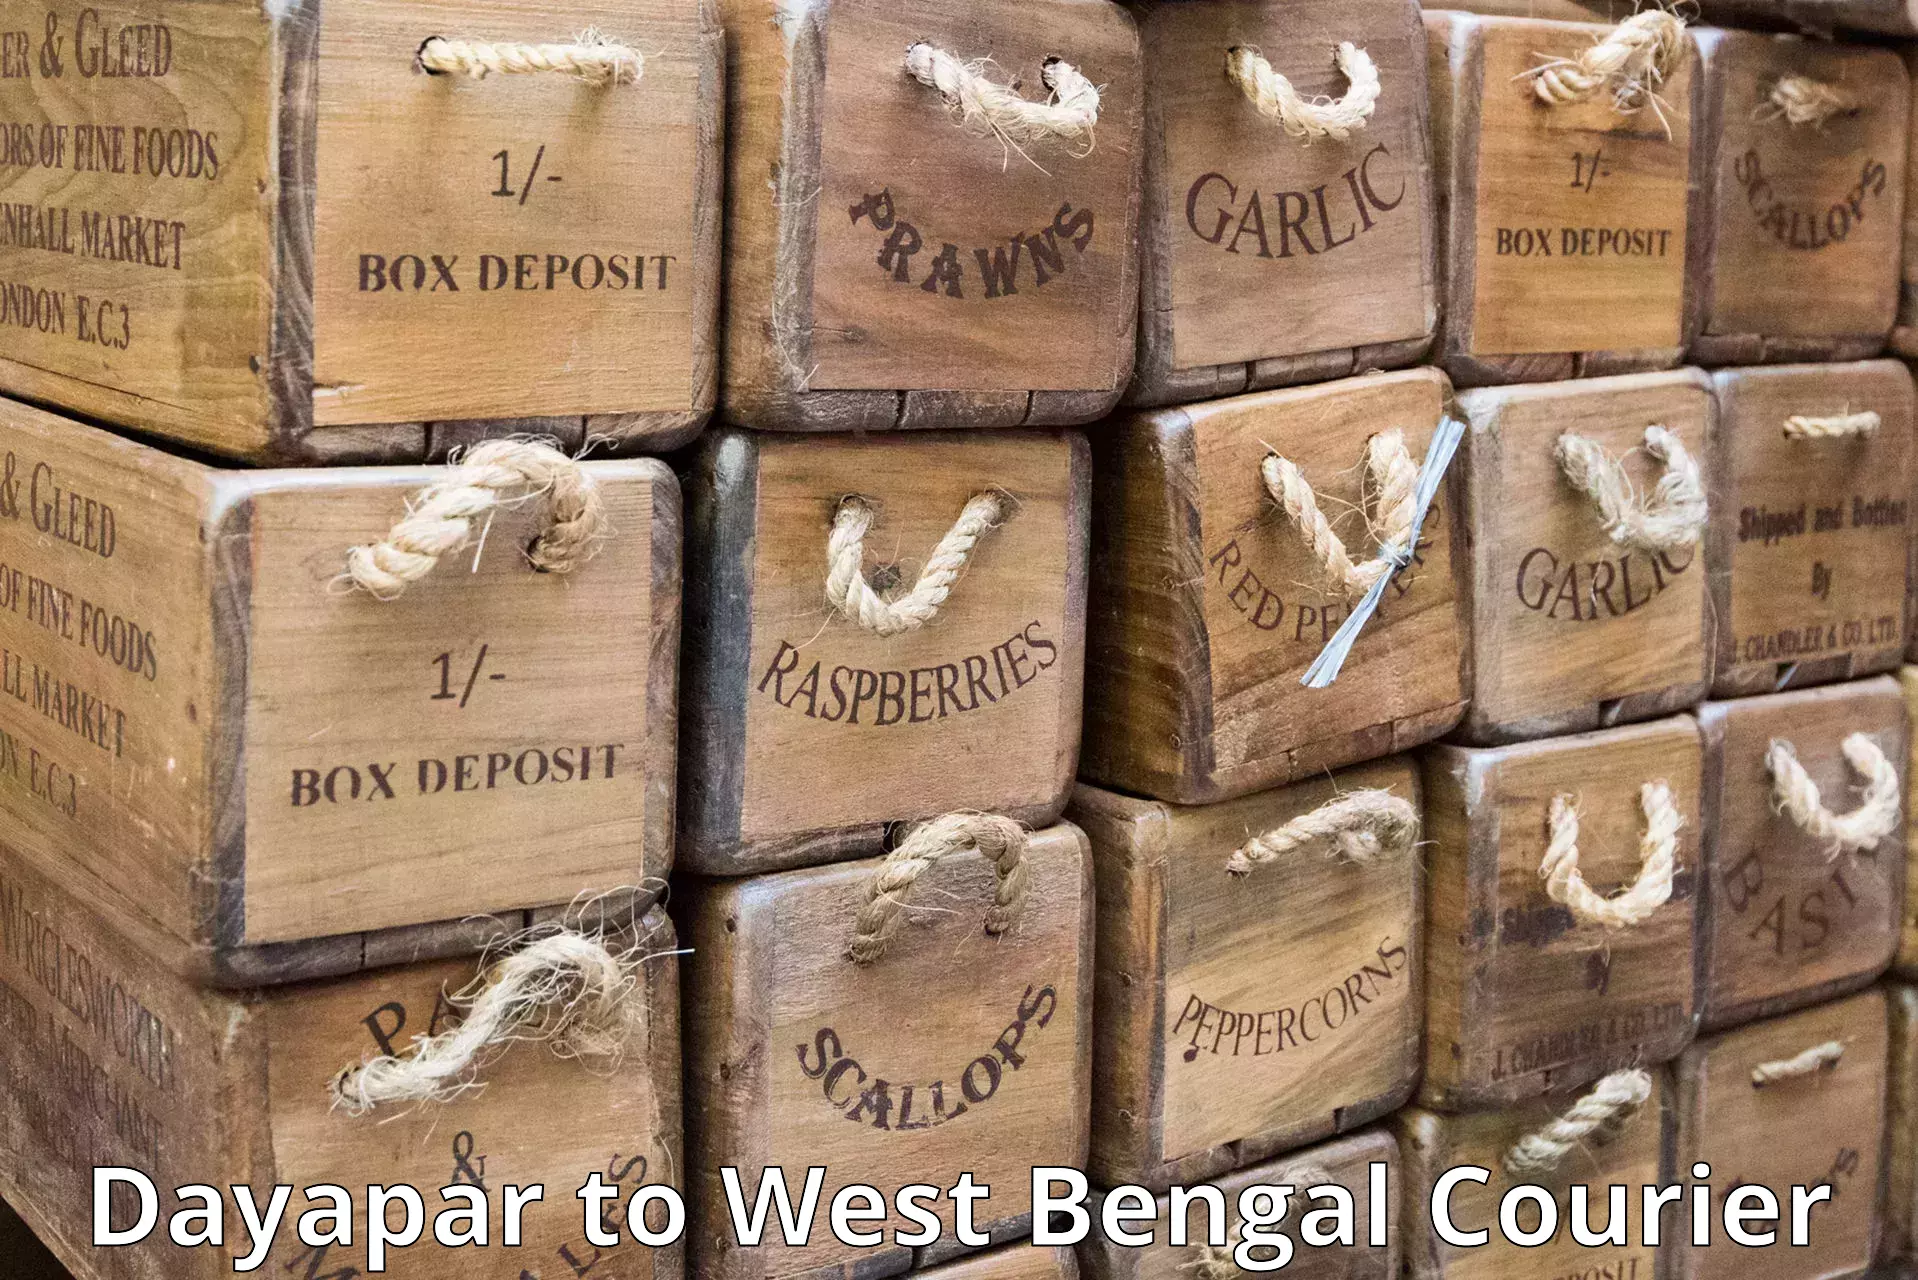 Next-day delivery options Dayapar to Midnapore